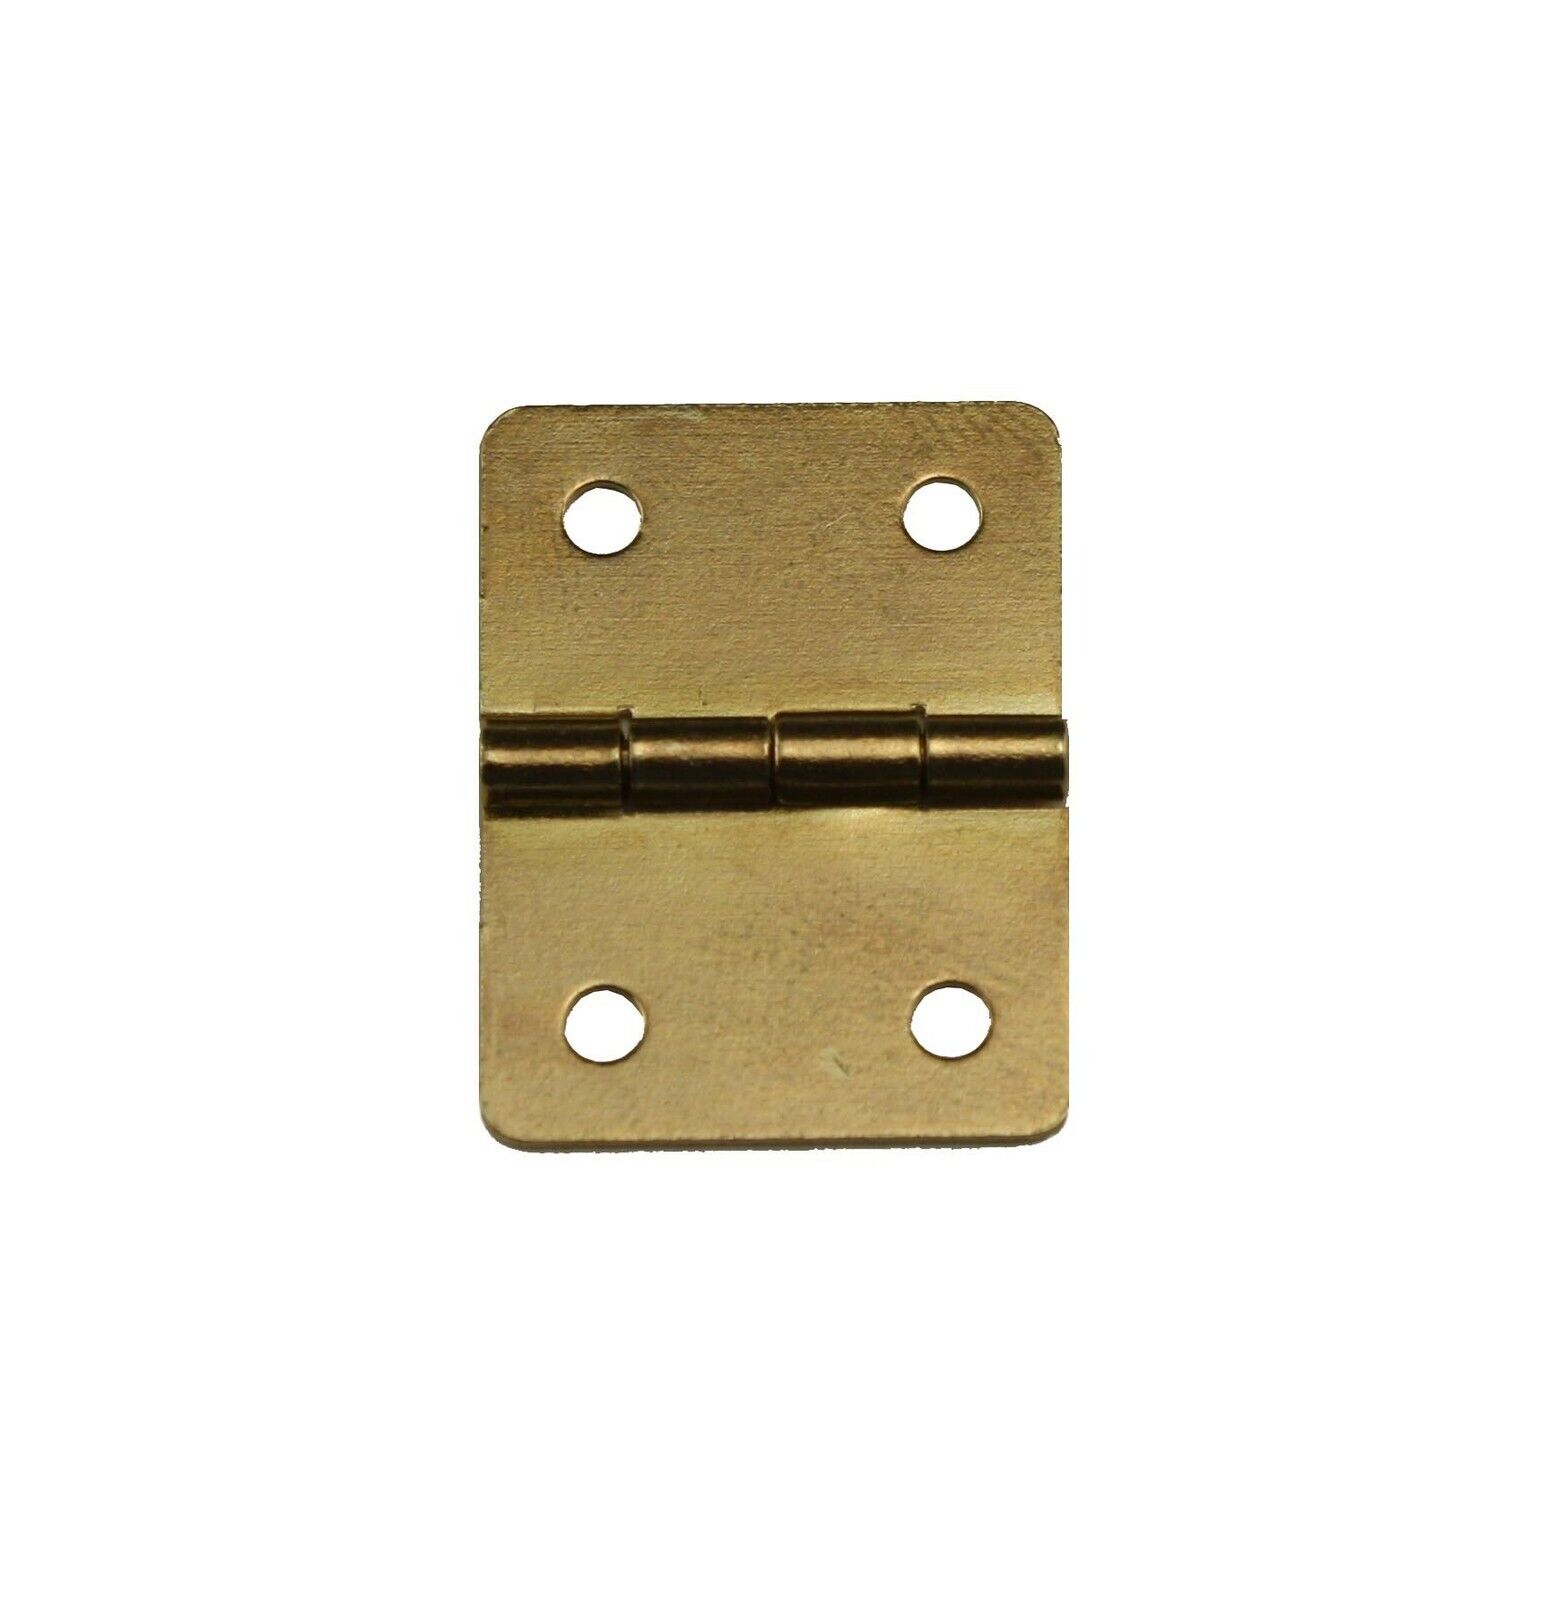 6050 Brass Plate Hinge SHIPPING